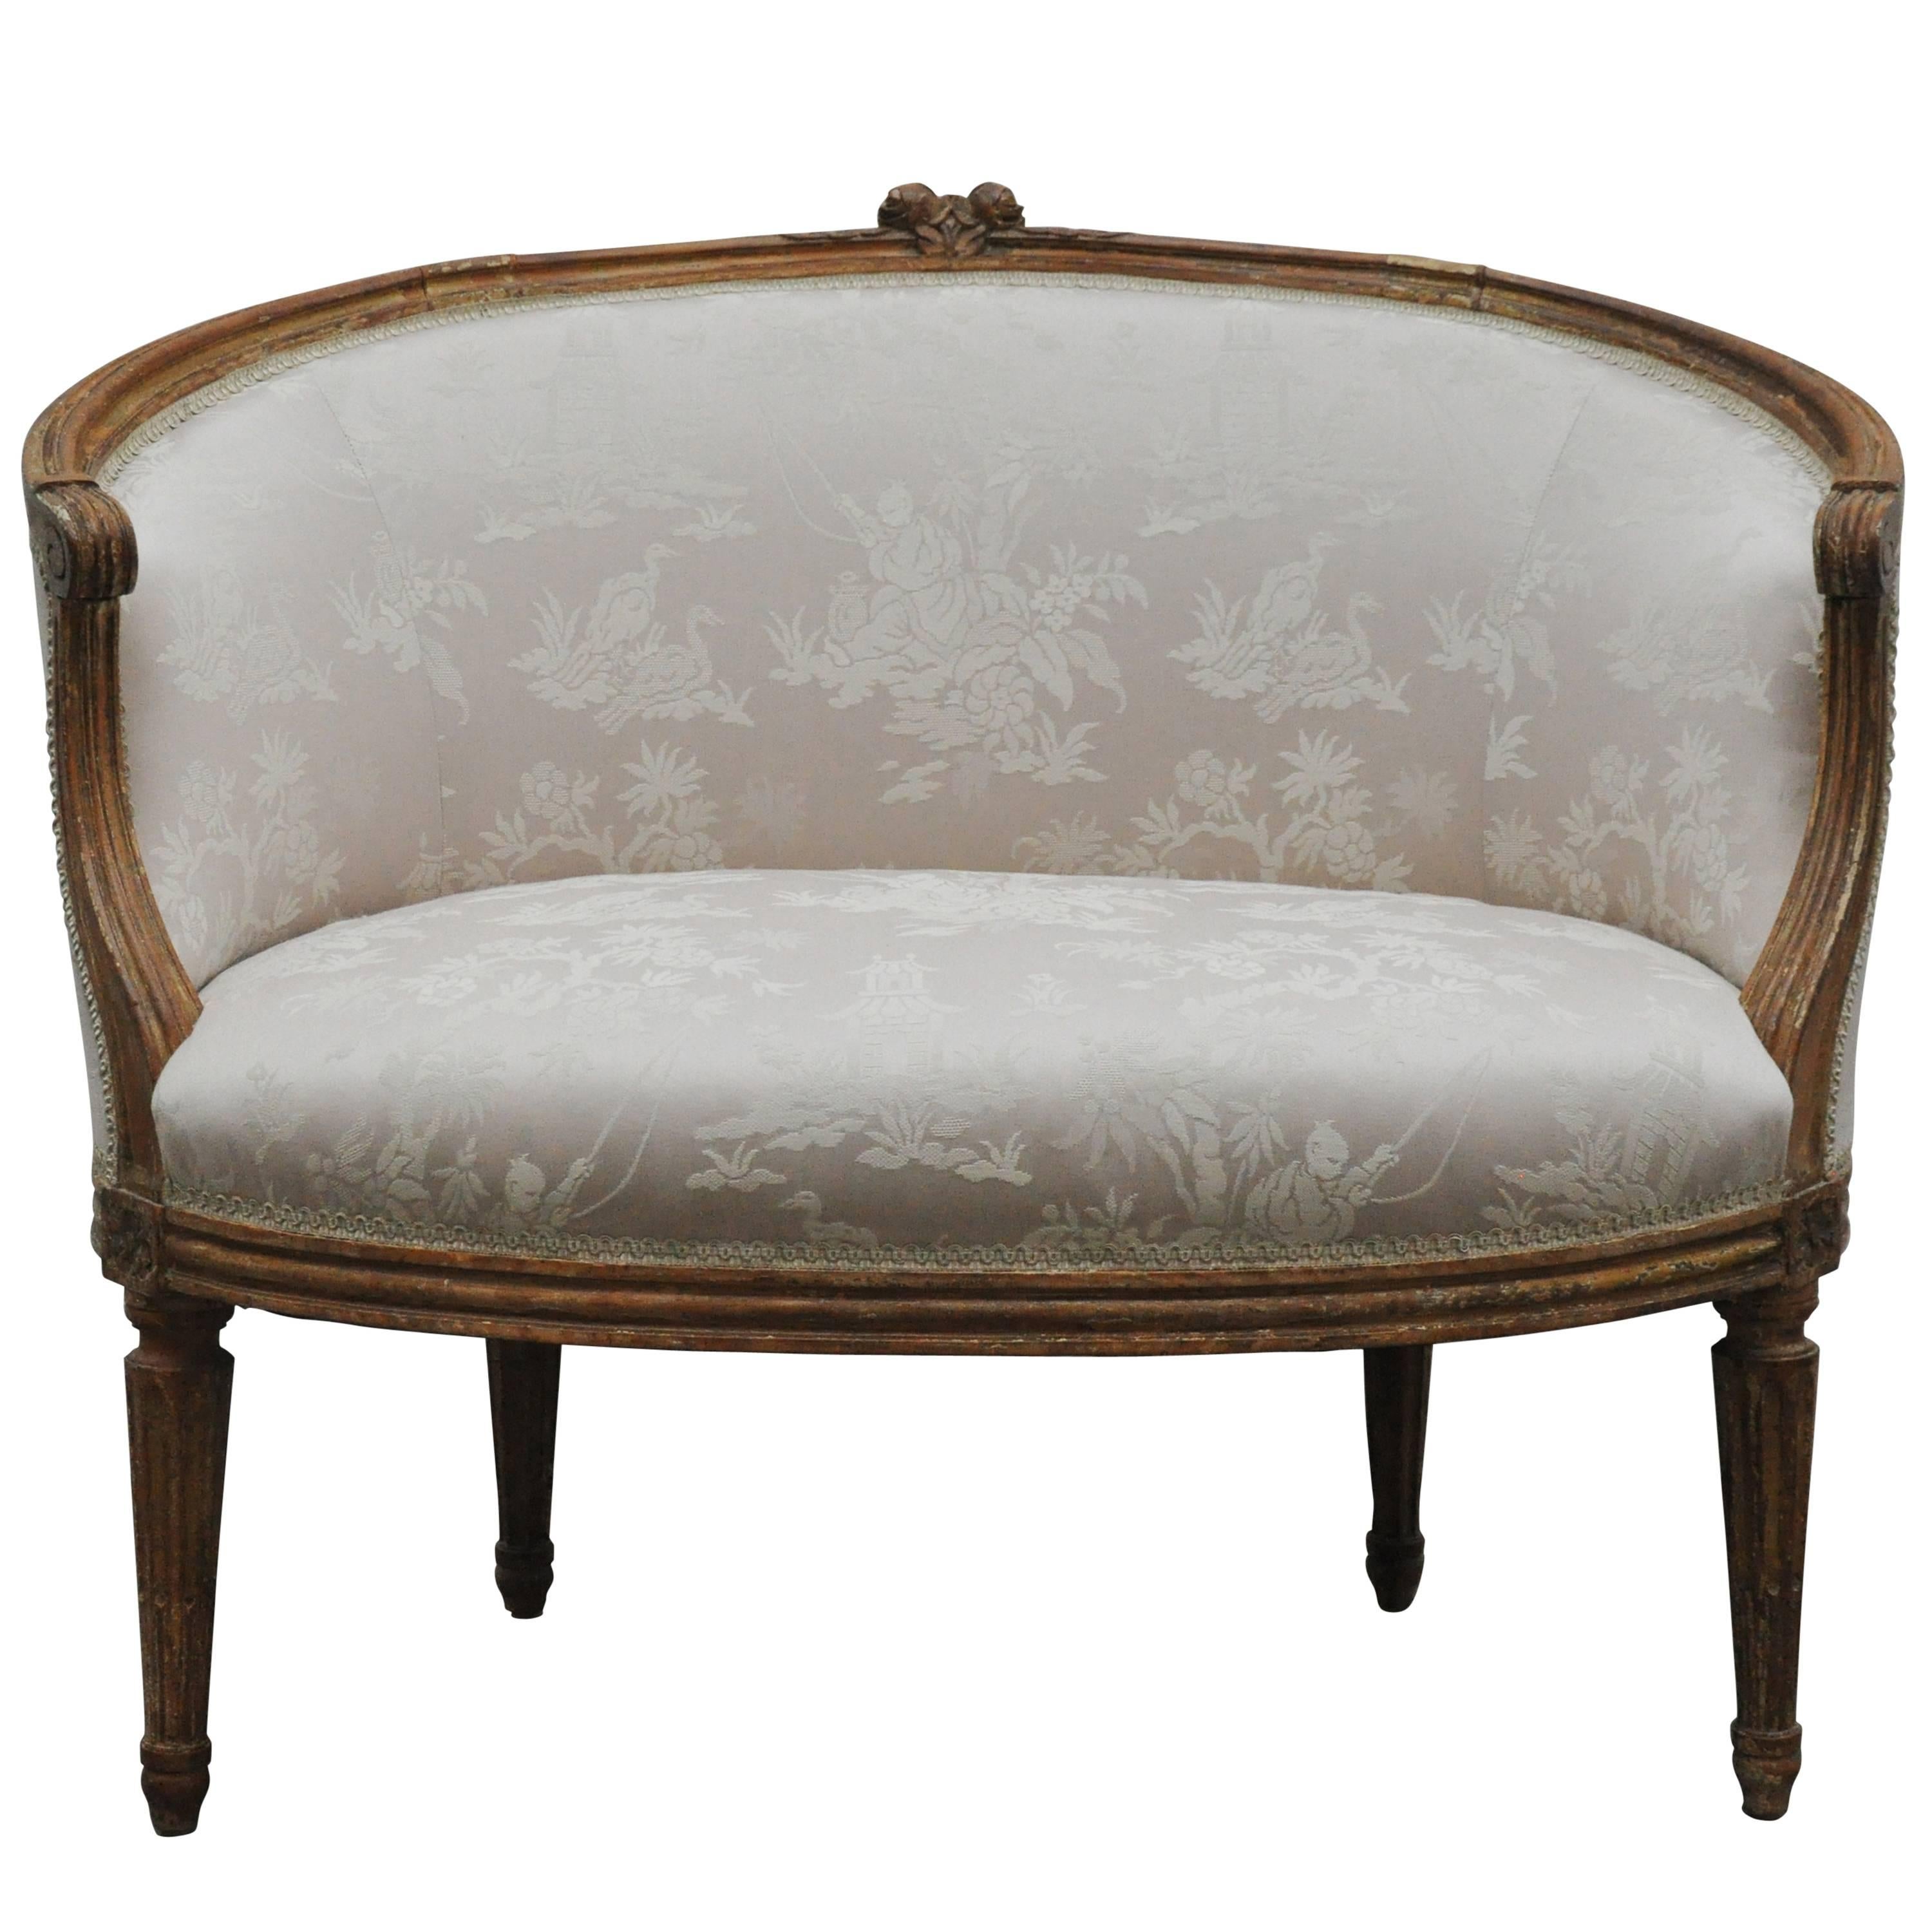 Antique French Settee or Canape For Sale